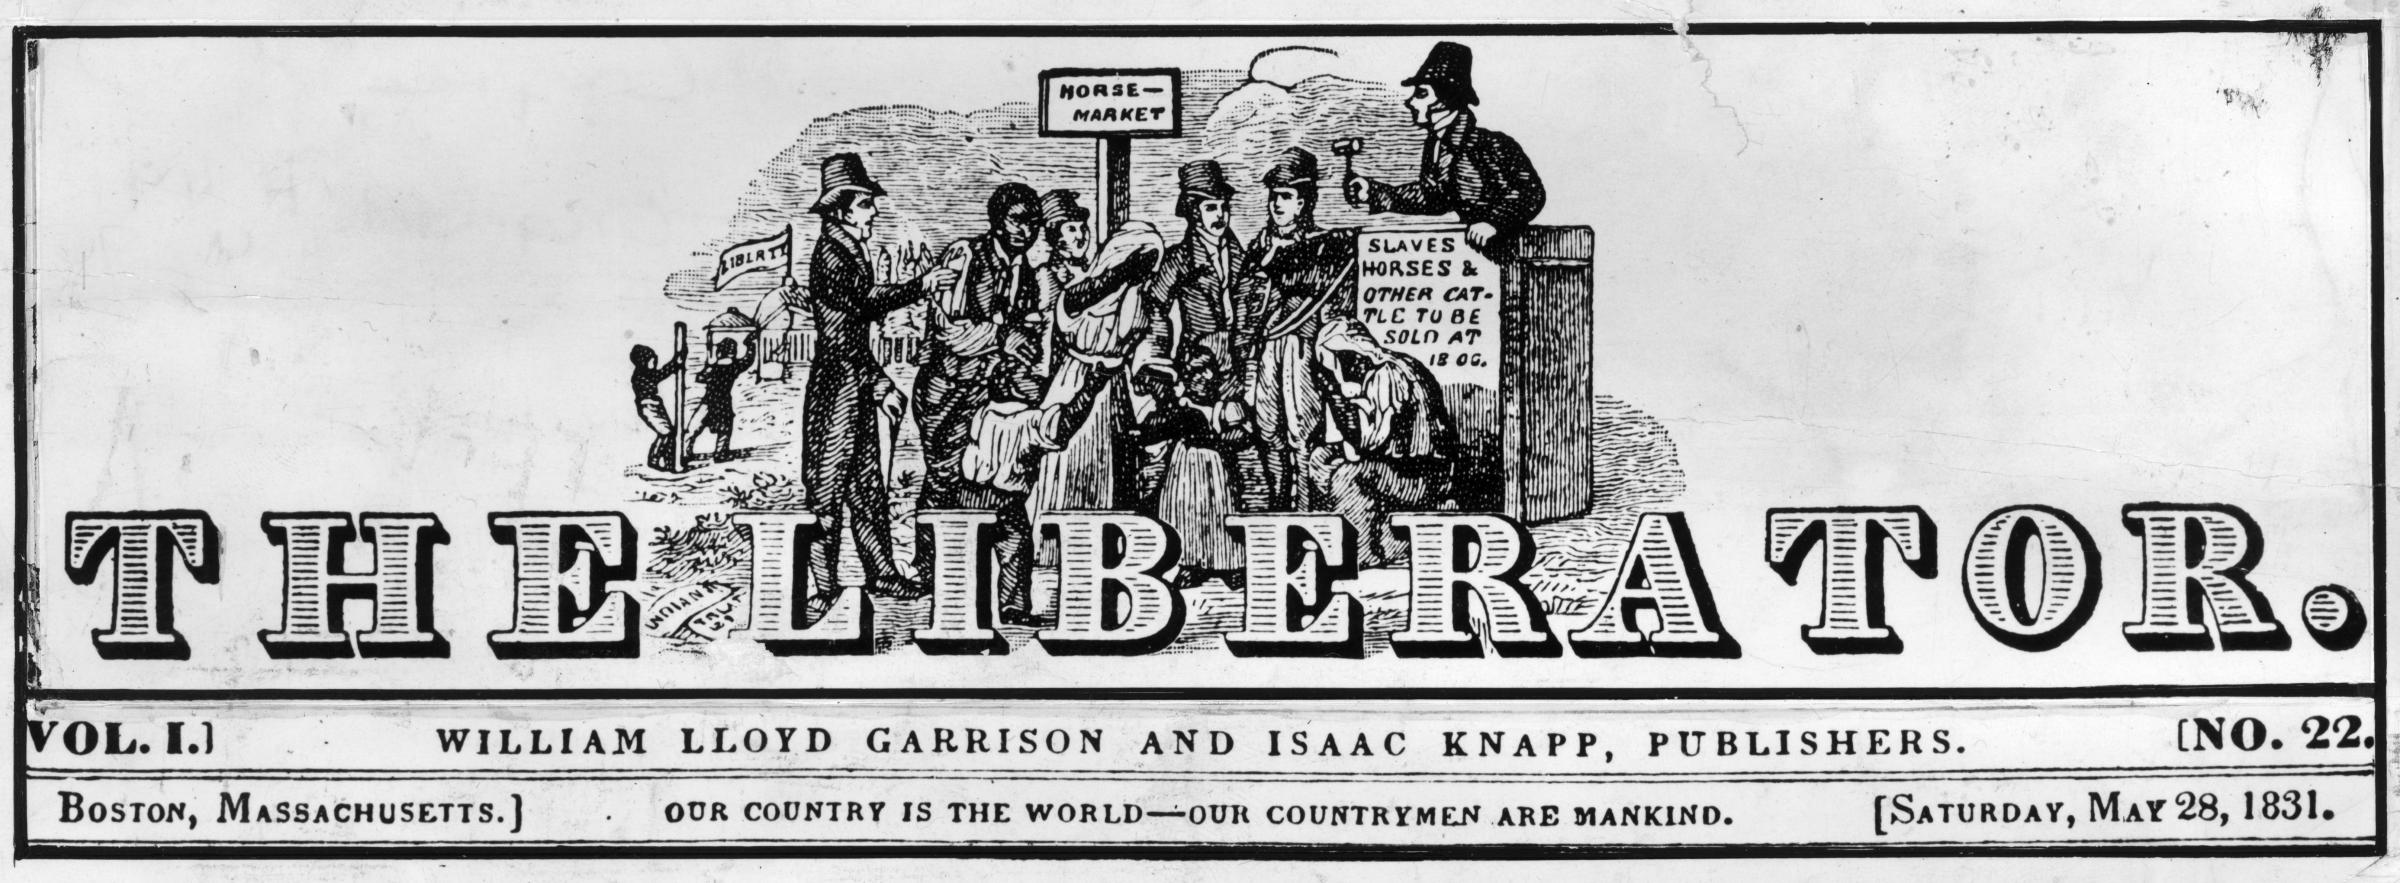 Letterhead of the William Lloyd Garrison campaigning paper 'The Liberator' published in Boston, Massachusetts, 1831.